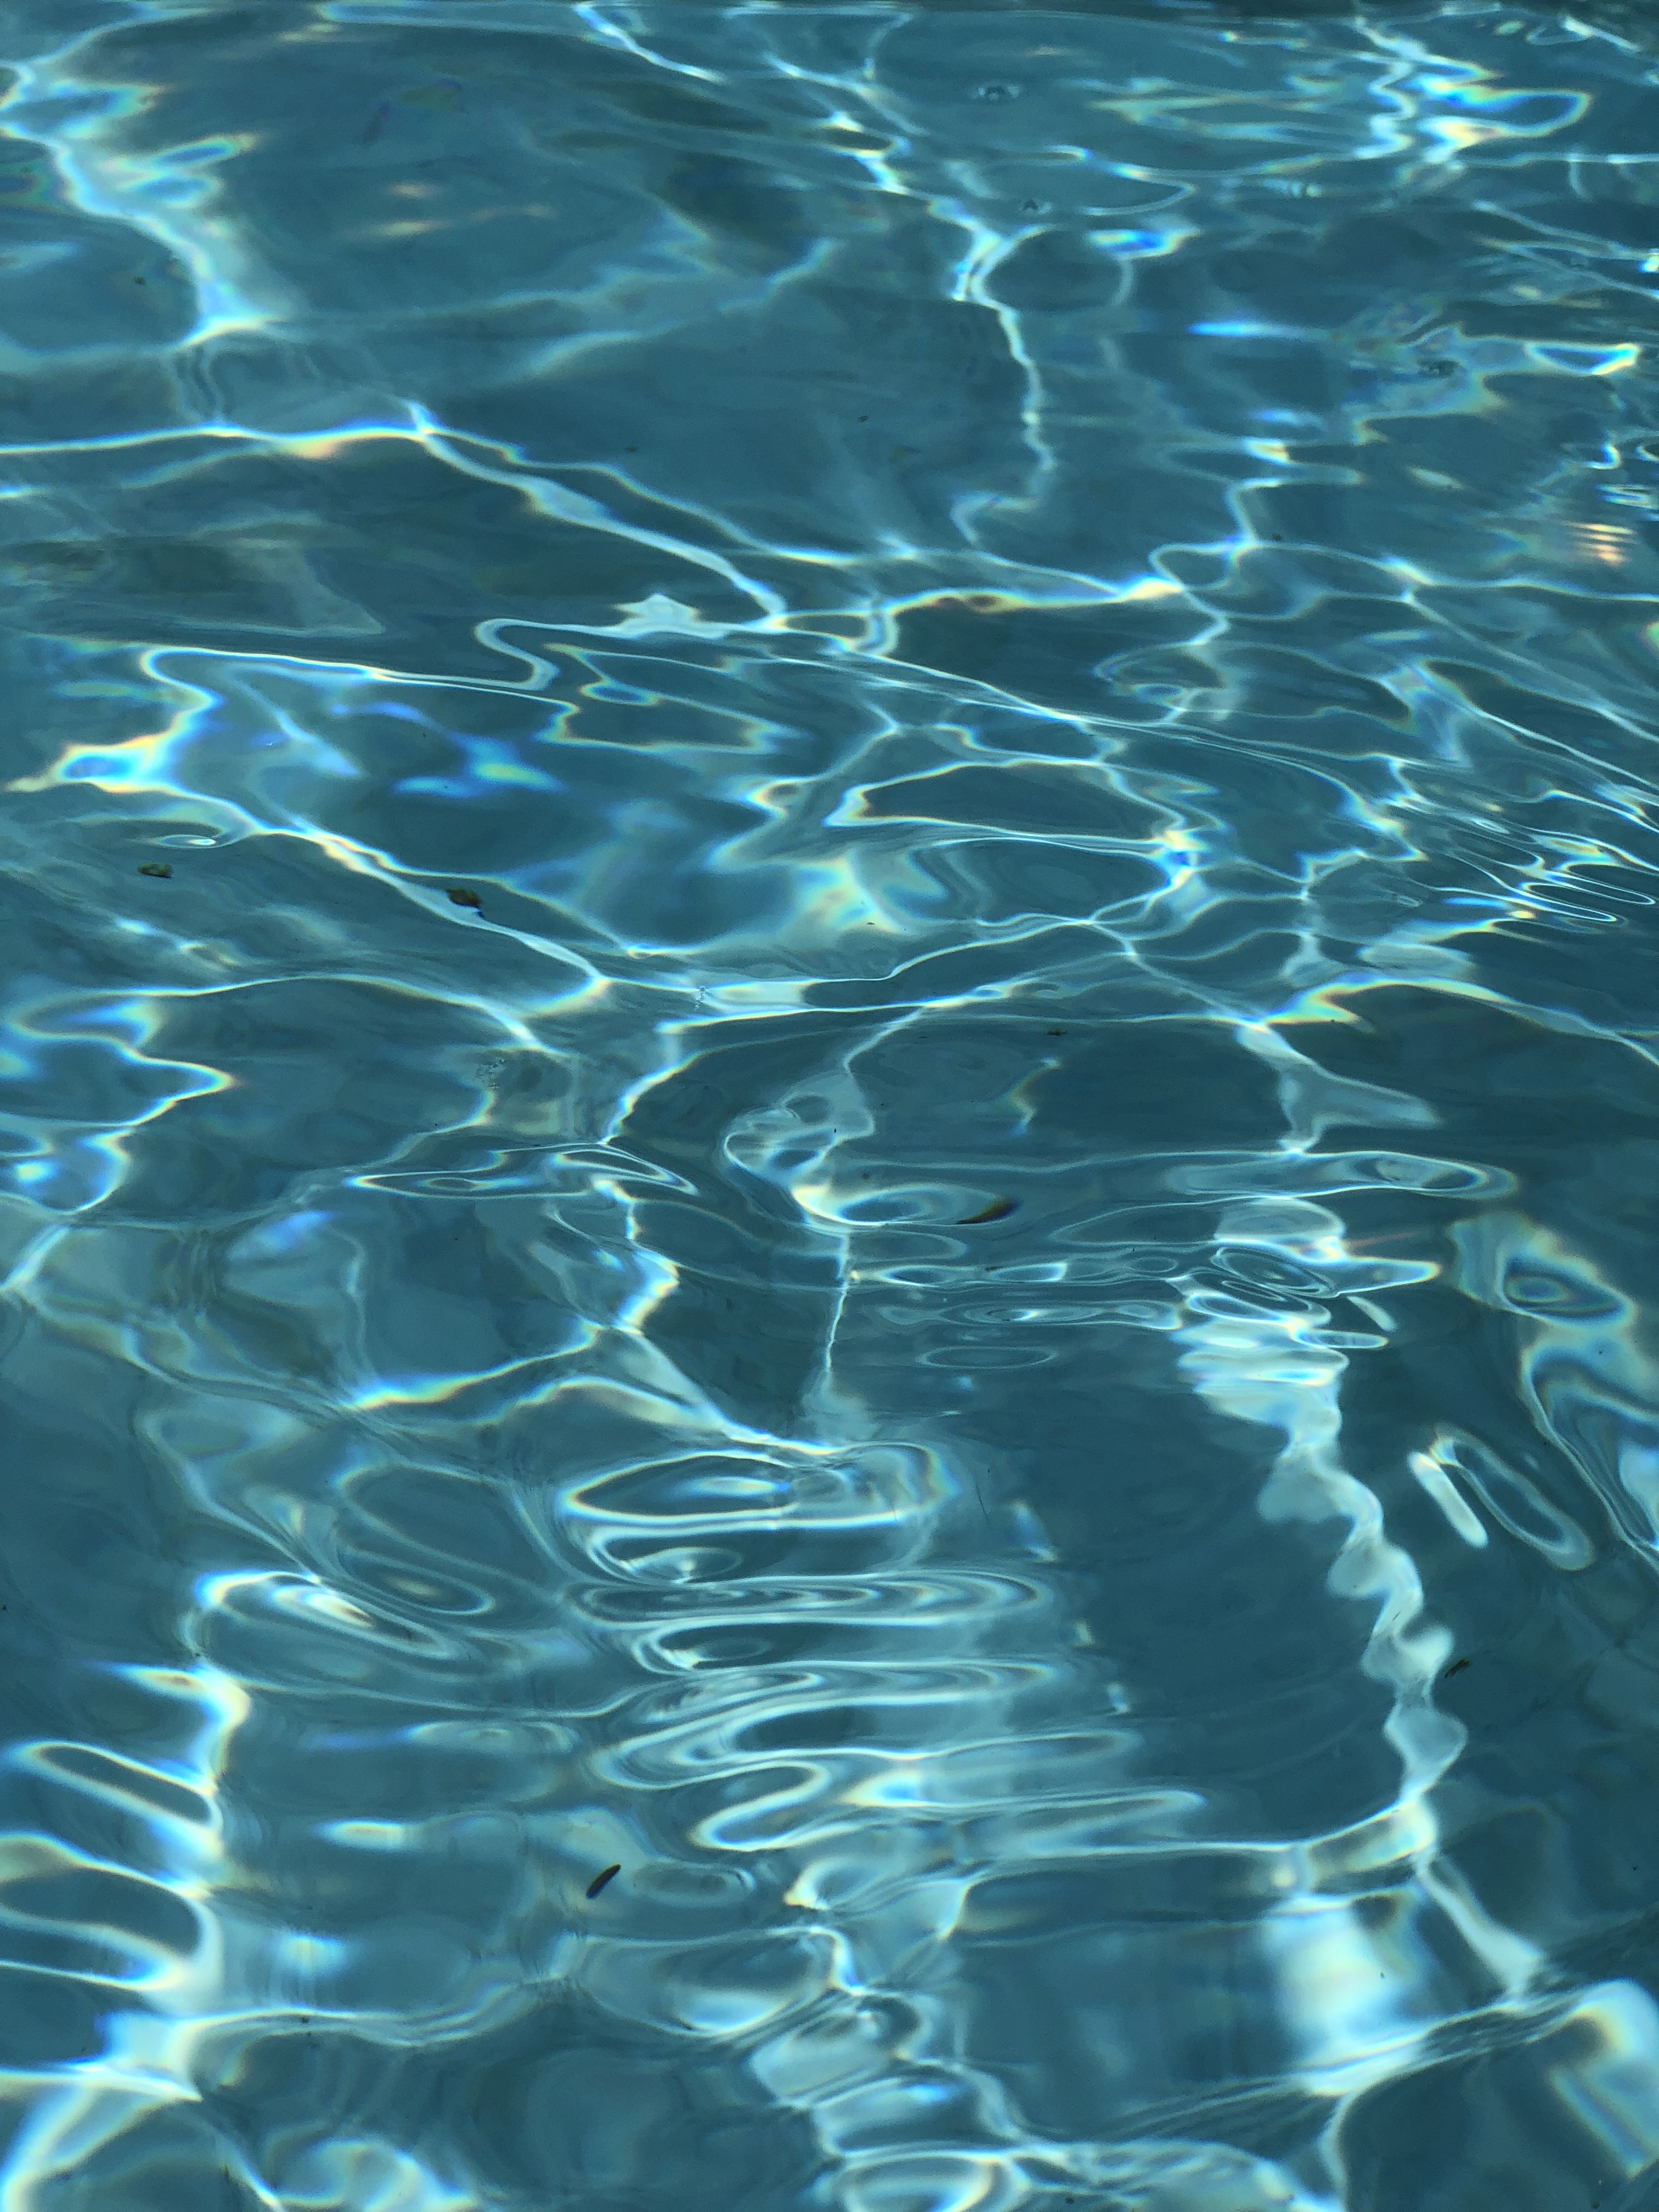 A pool of water with ripples and light reflecting off the surface. - Water, underwater, wave, aqua